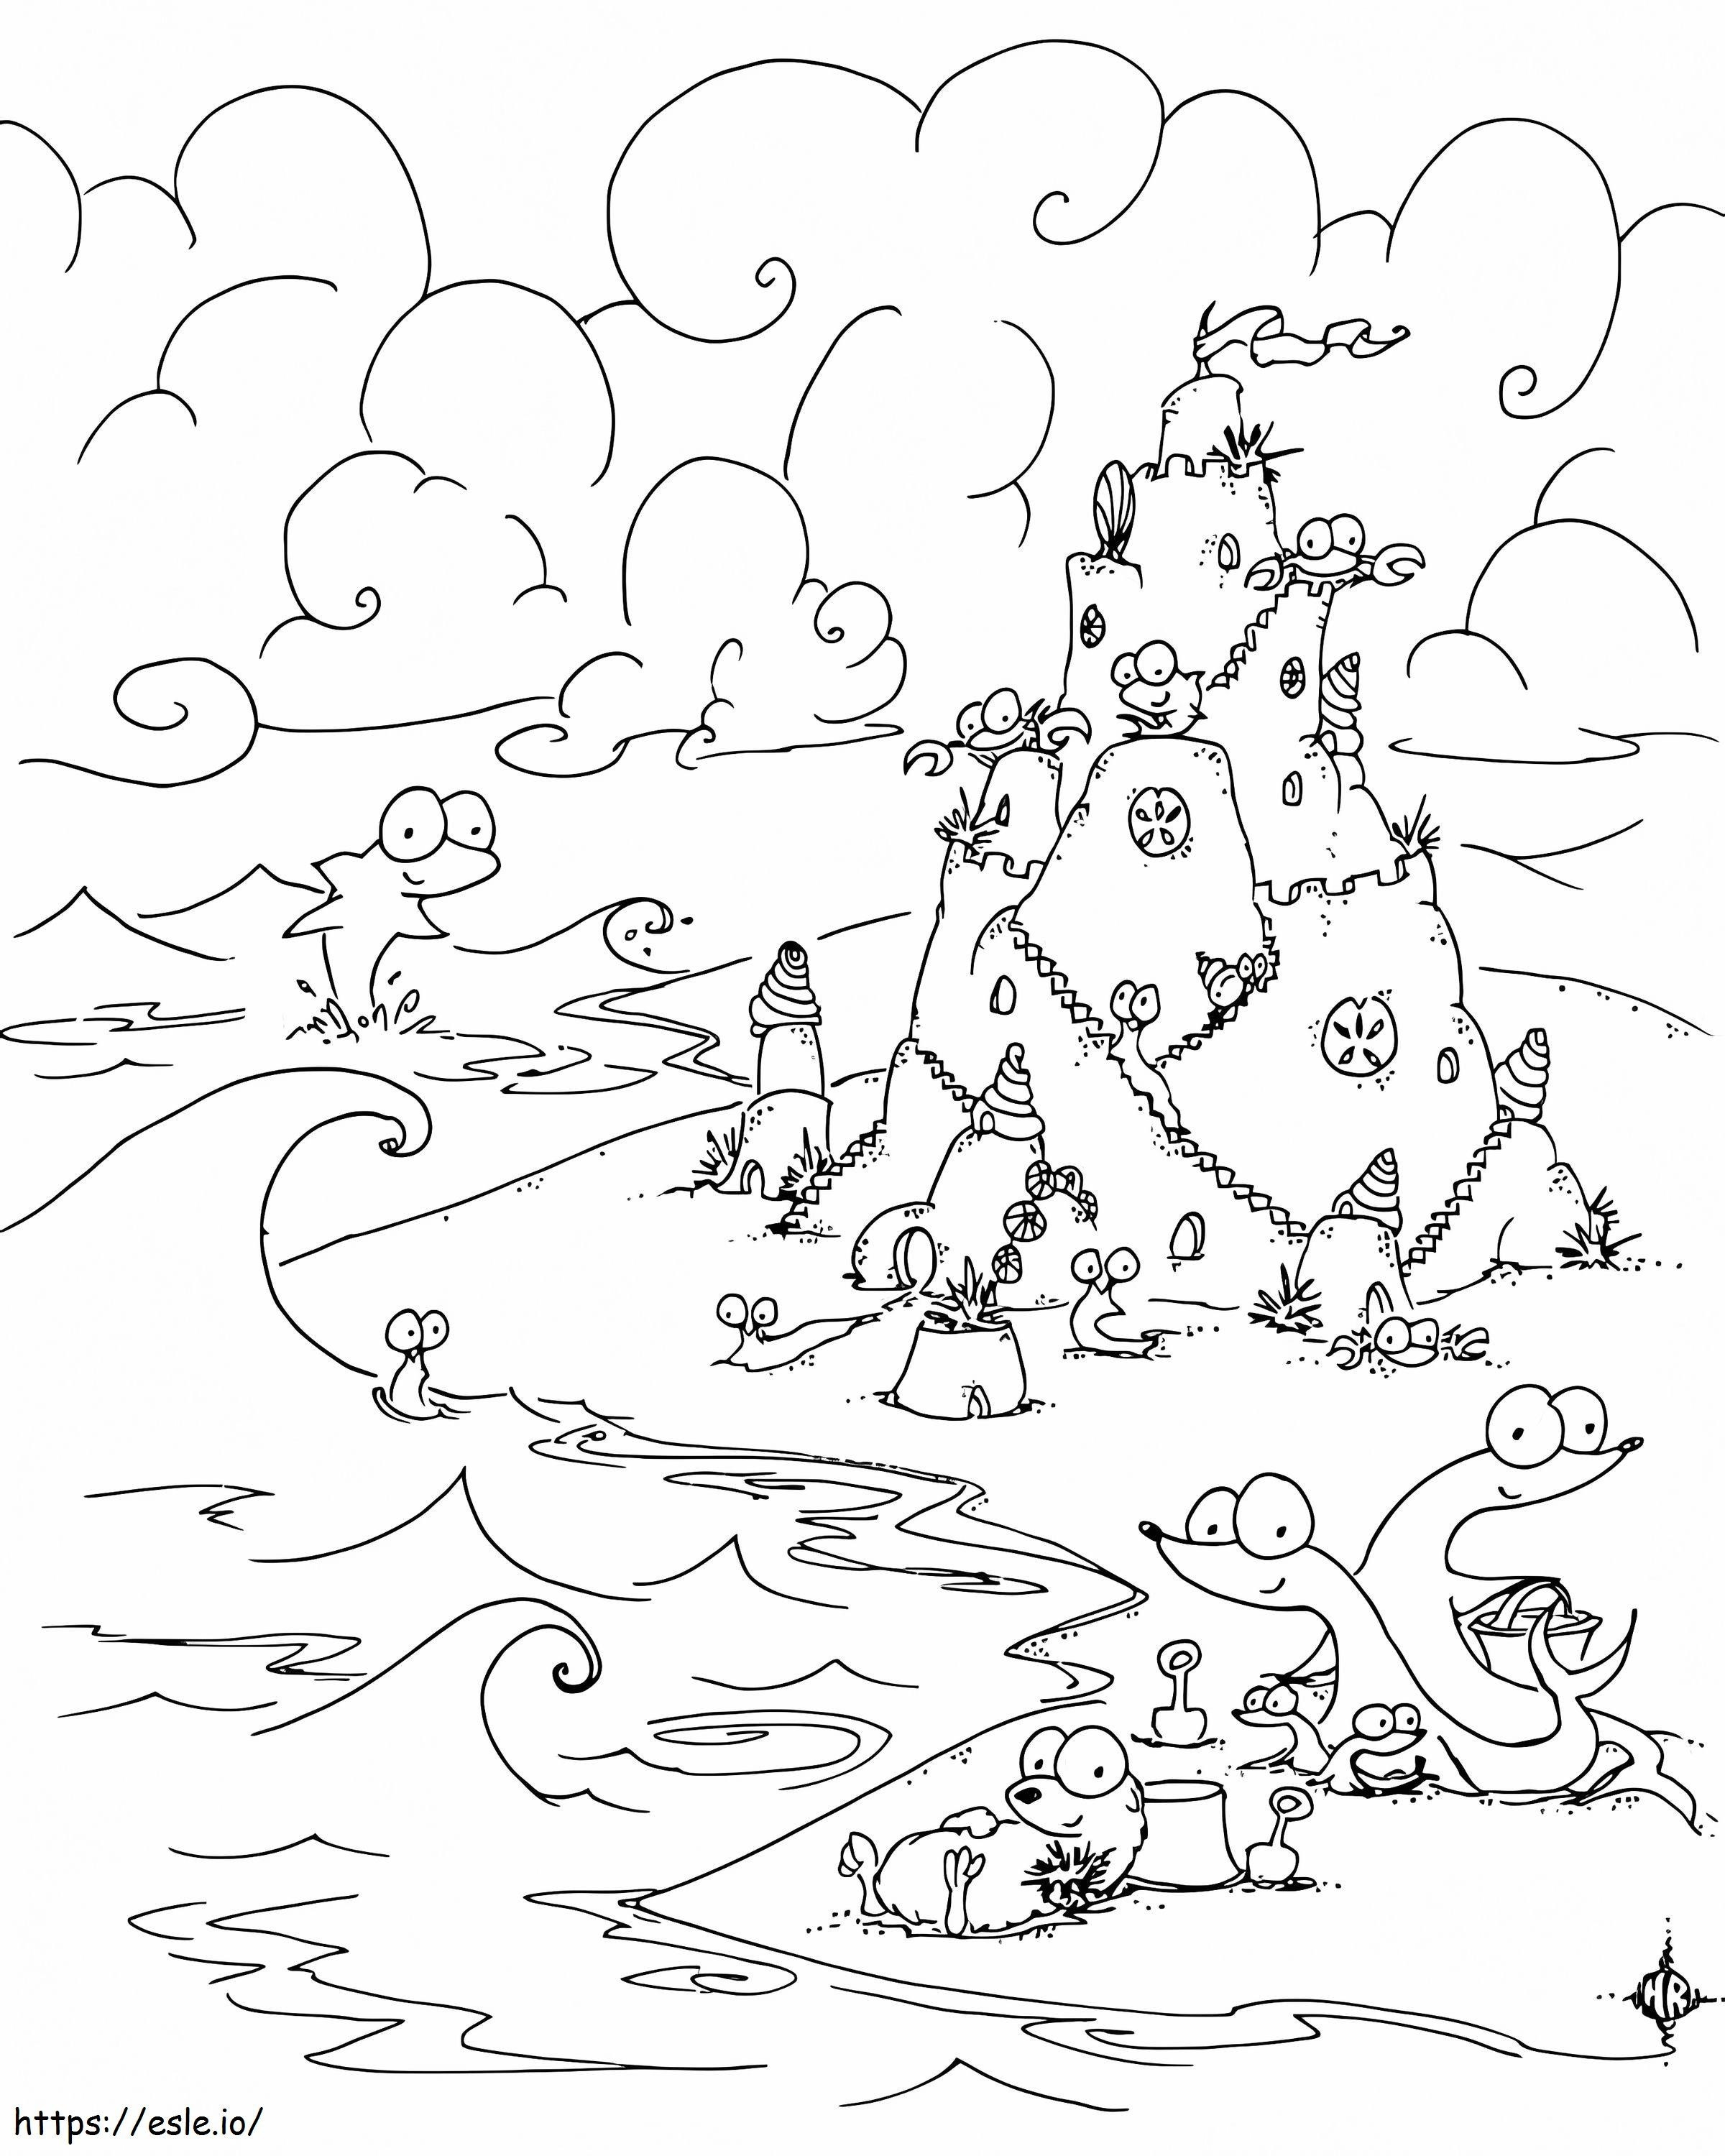 Amazing Sandcastle coloring page